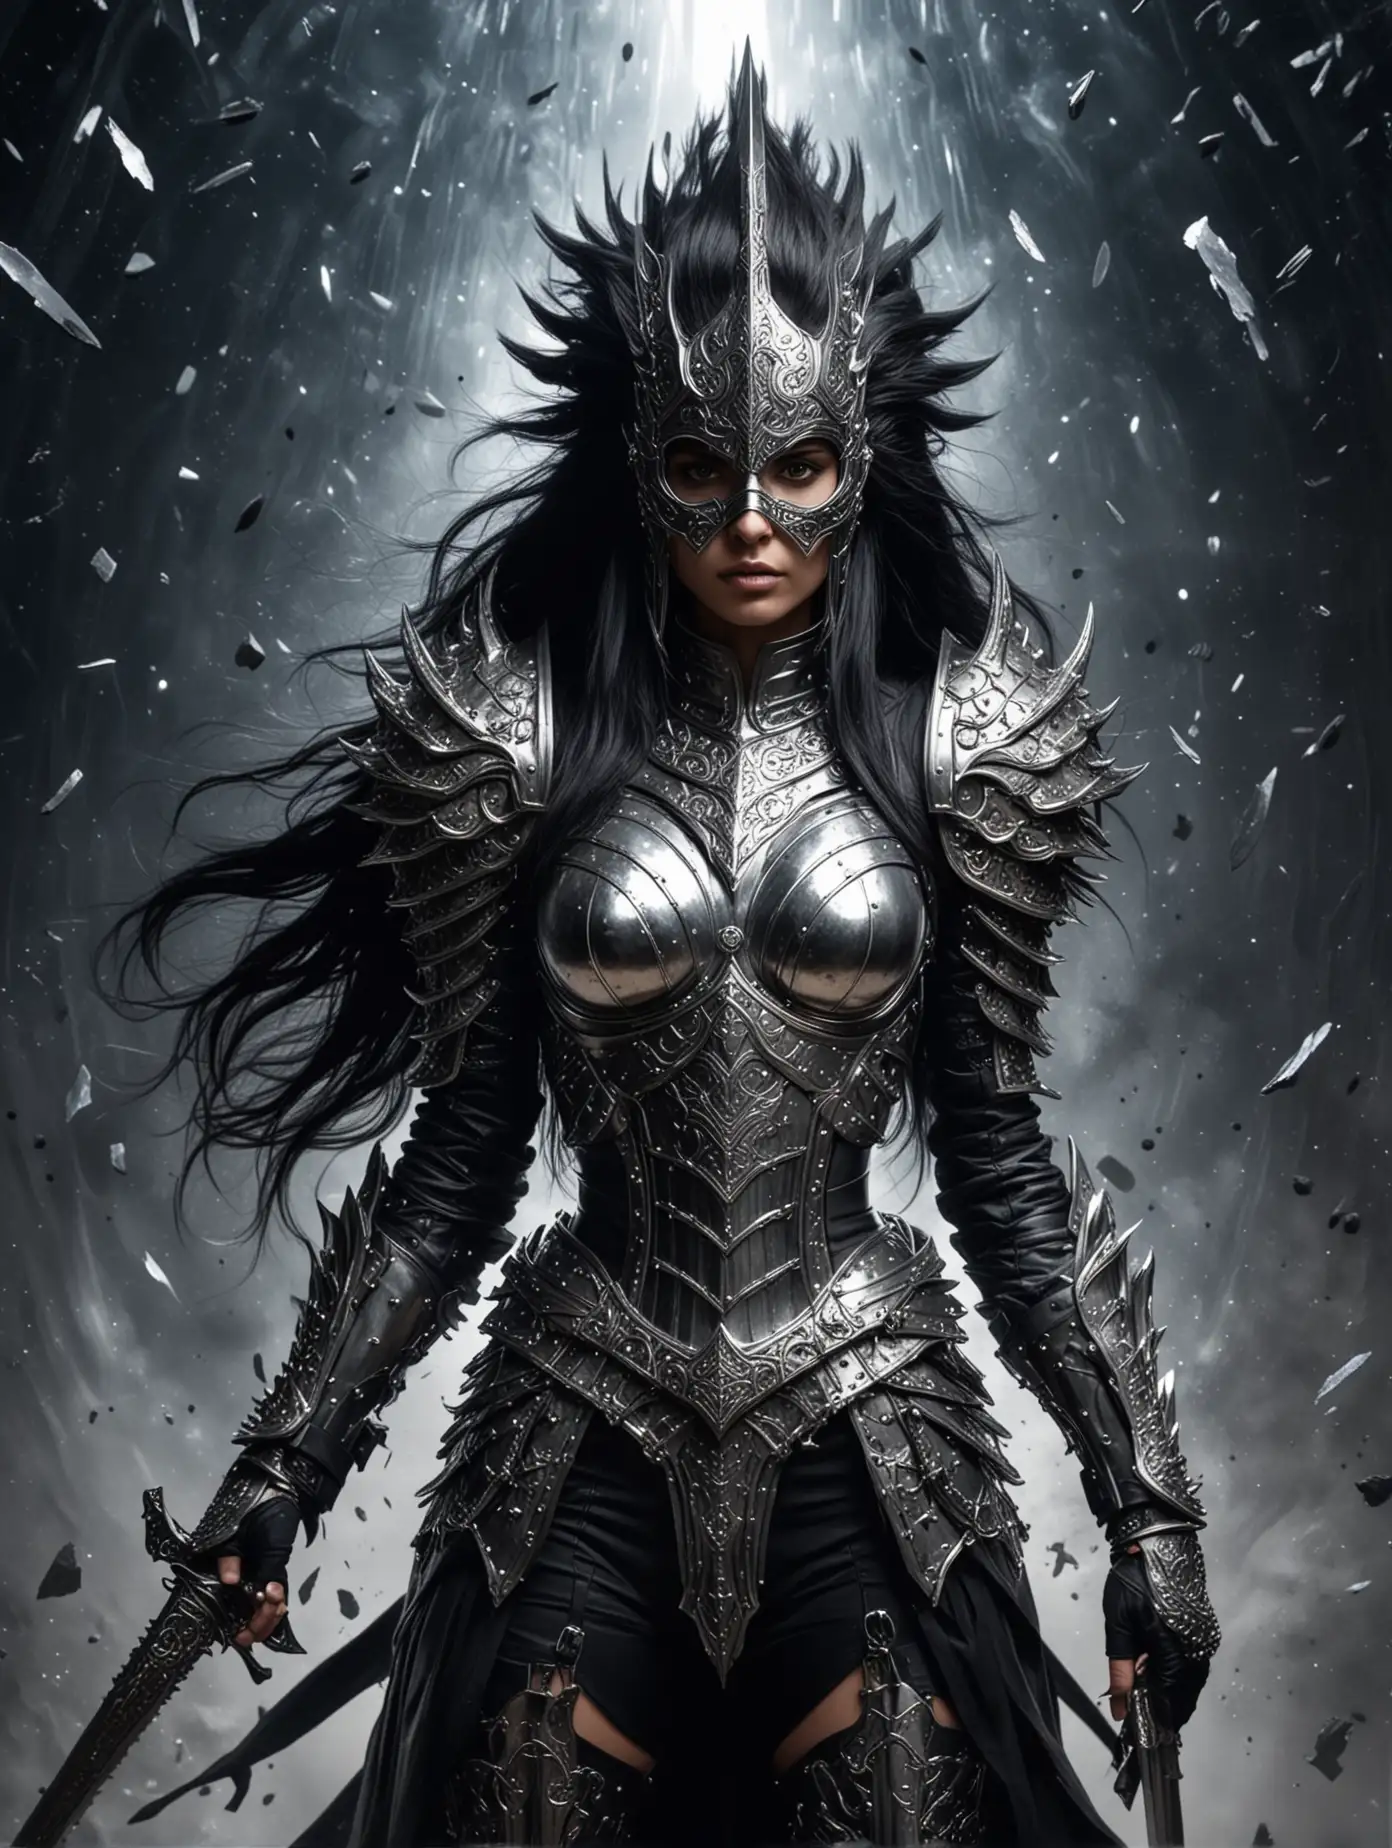 Powerful-Woman-Warrior-in-Voluminous-Silver-Armor-Confronts-Black-Hole